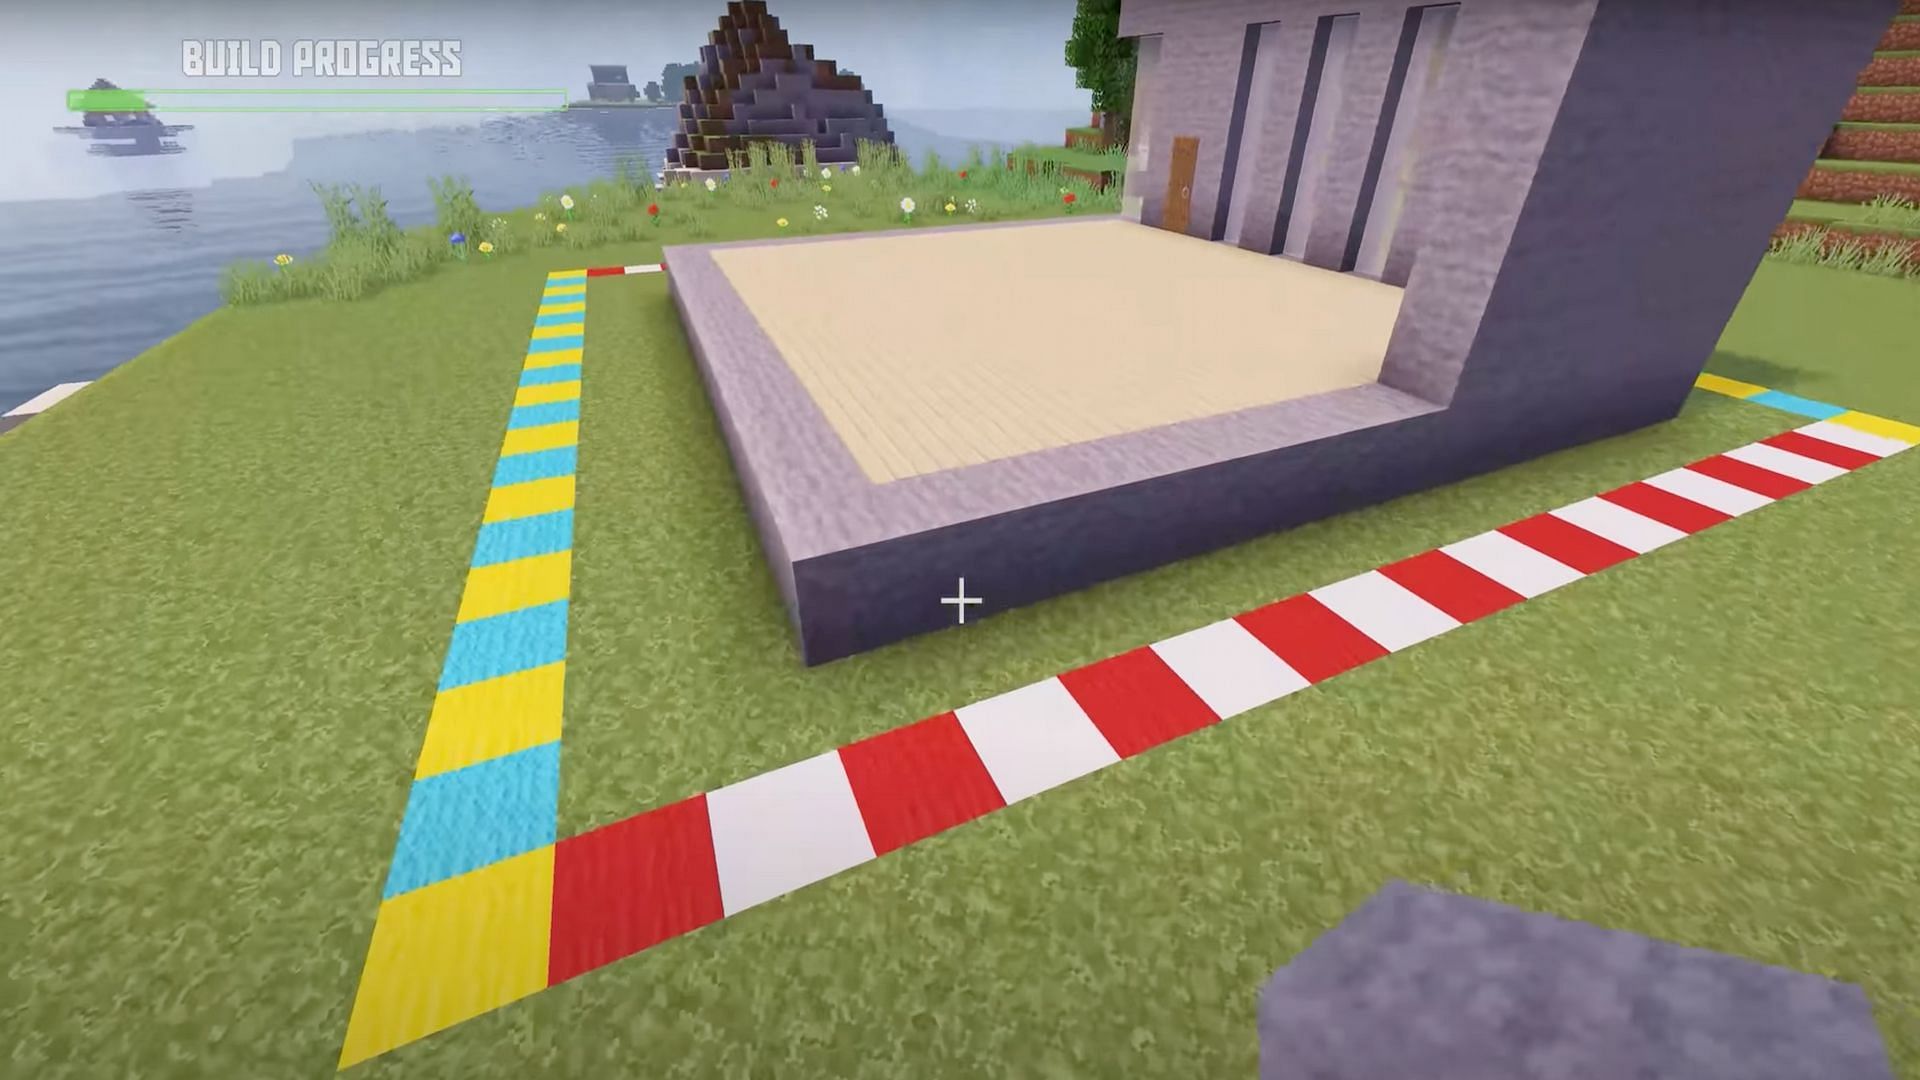 Once the foundations have been laid, it's time for players to build the walls (Image via Greg Builds/YouTube)